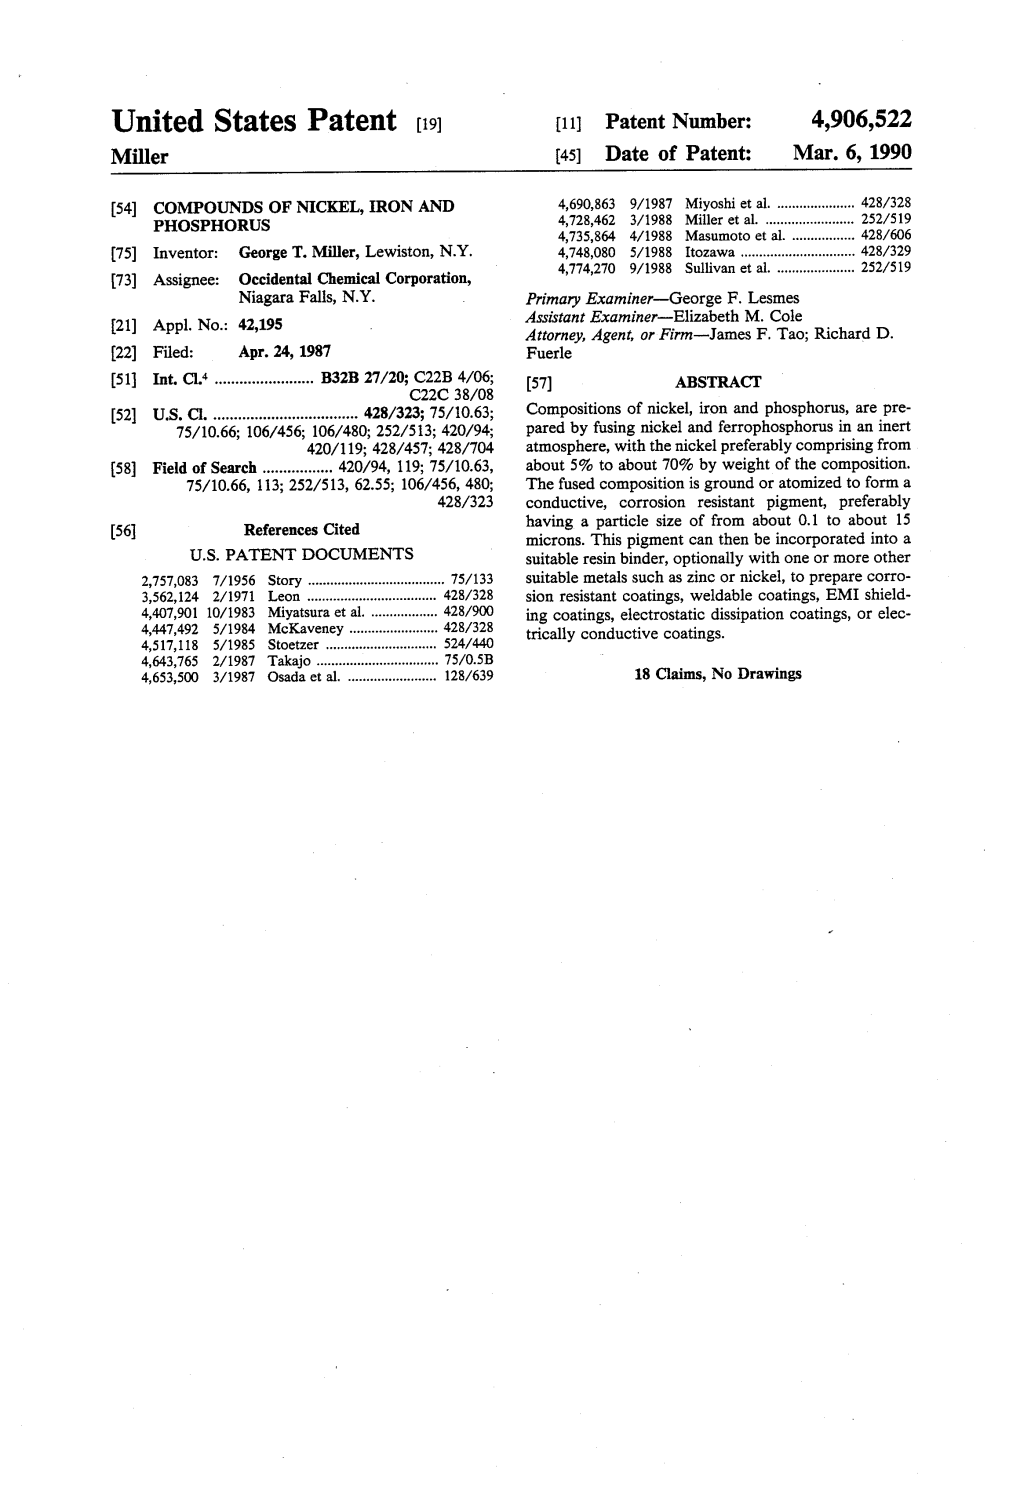 United States Patent (19) 11 Patent Number: 4,906,522 Miller (45) Date of Patent: Mar